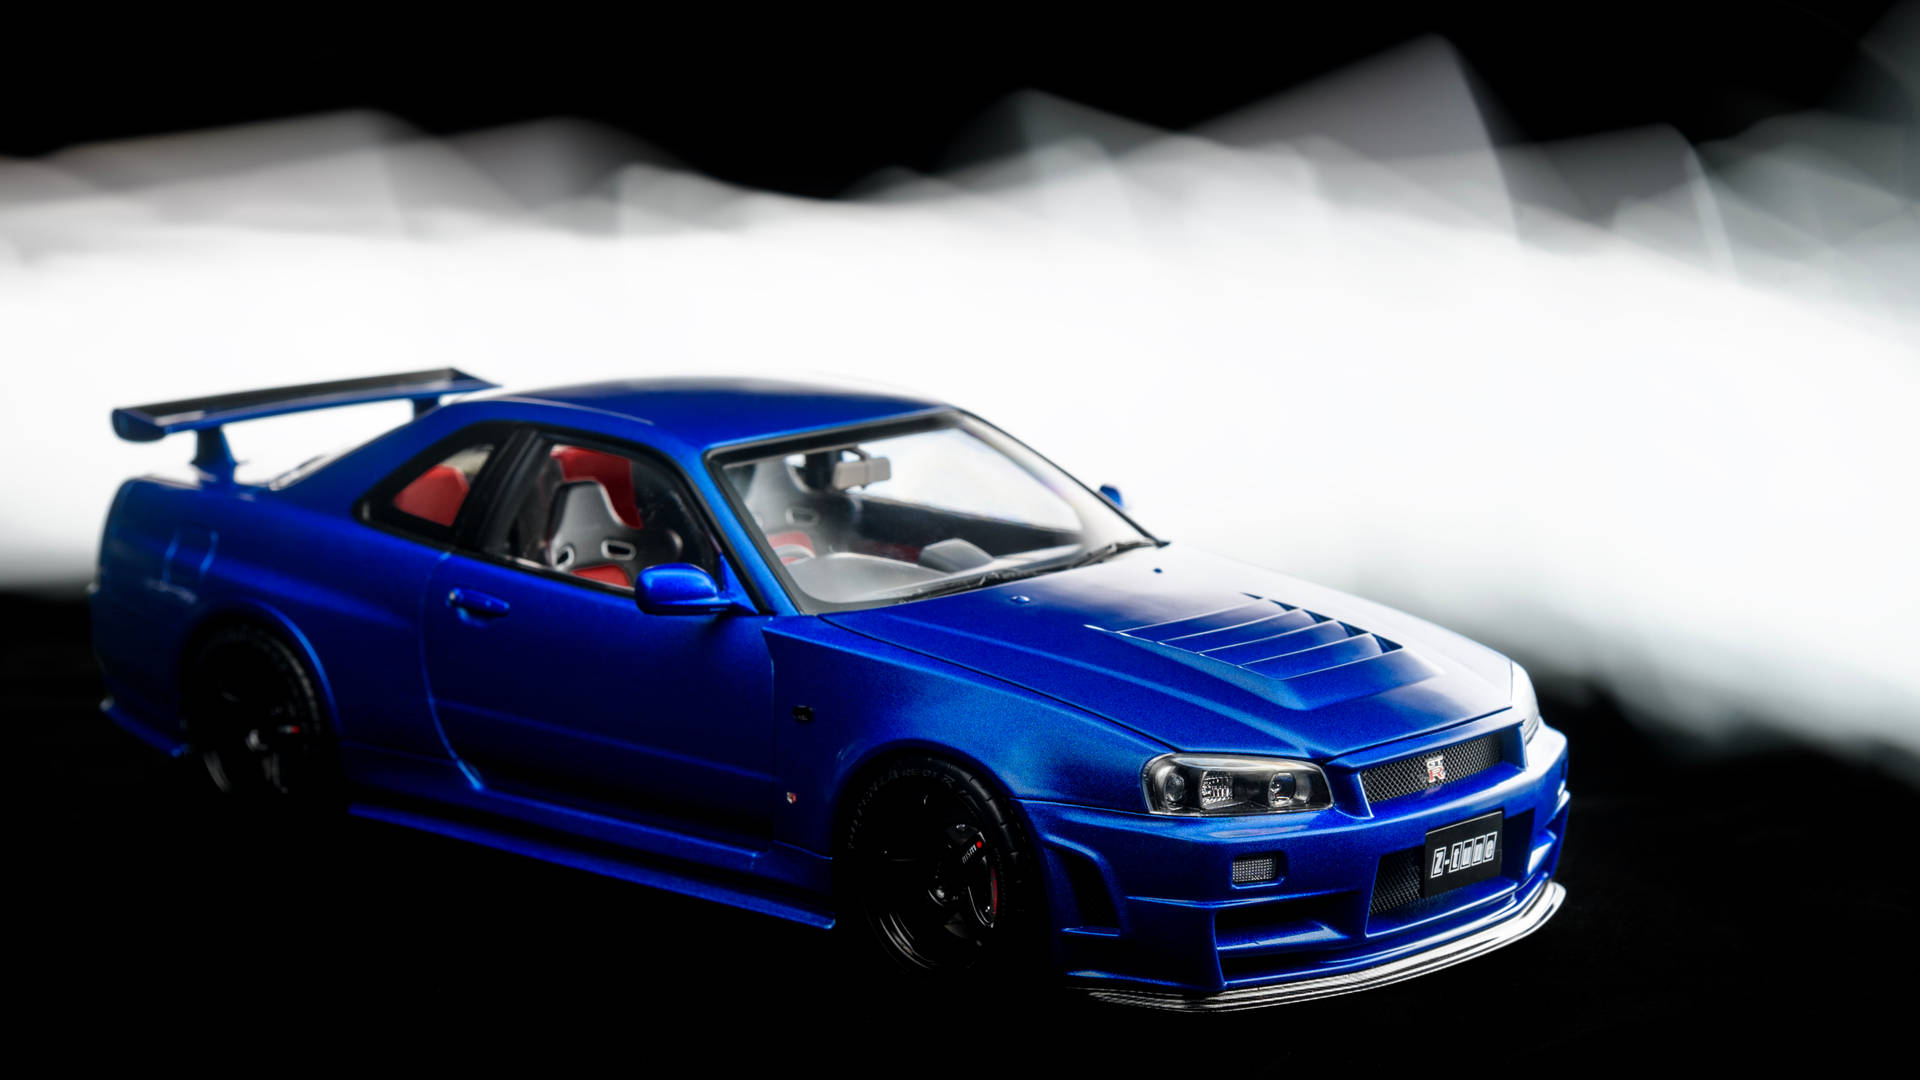 Free R34 Wallpaper Downloads, [100+] R34 Wallpapers for FREE | Wallpapers .com